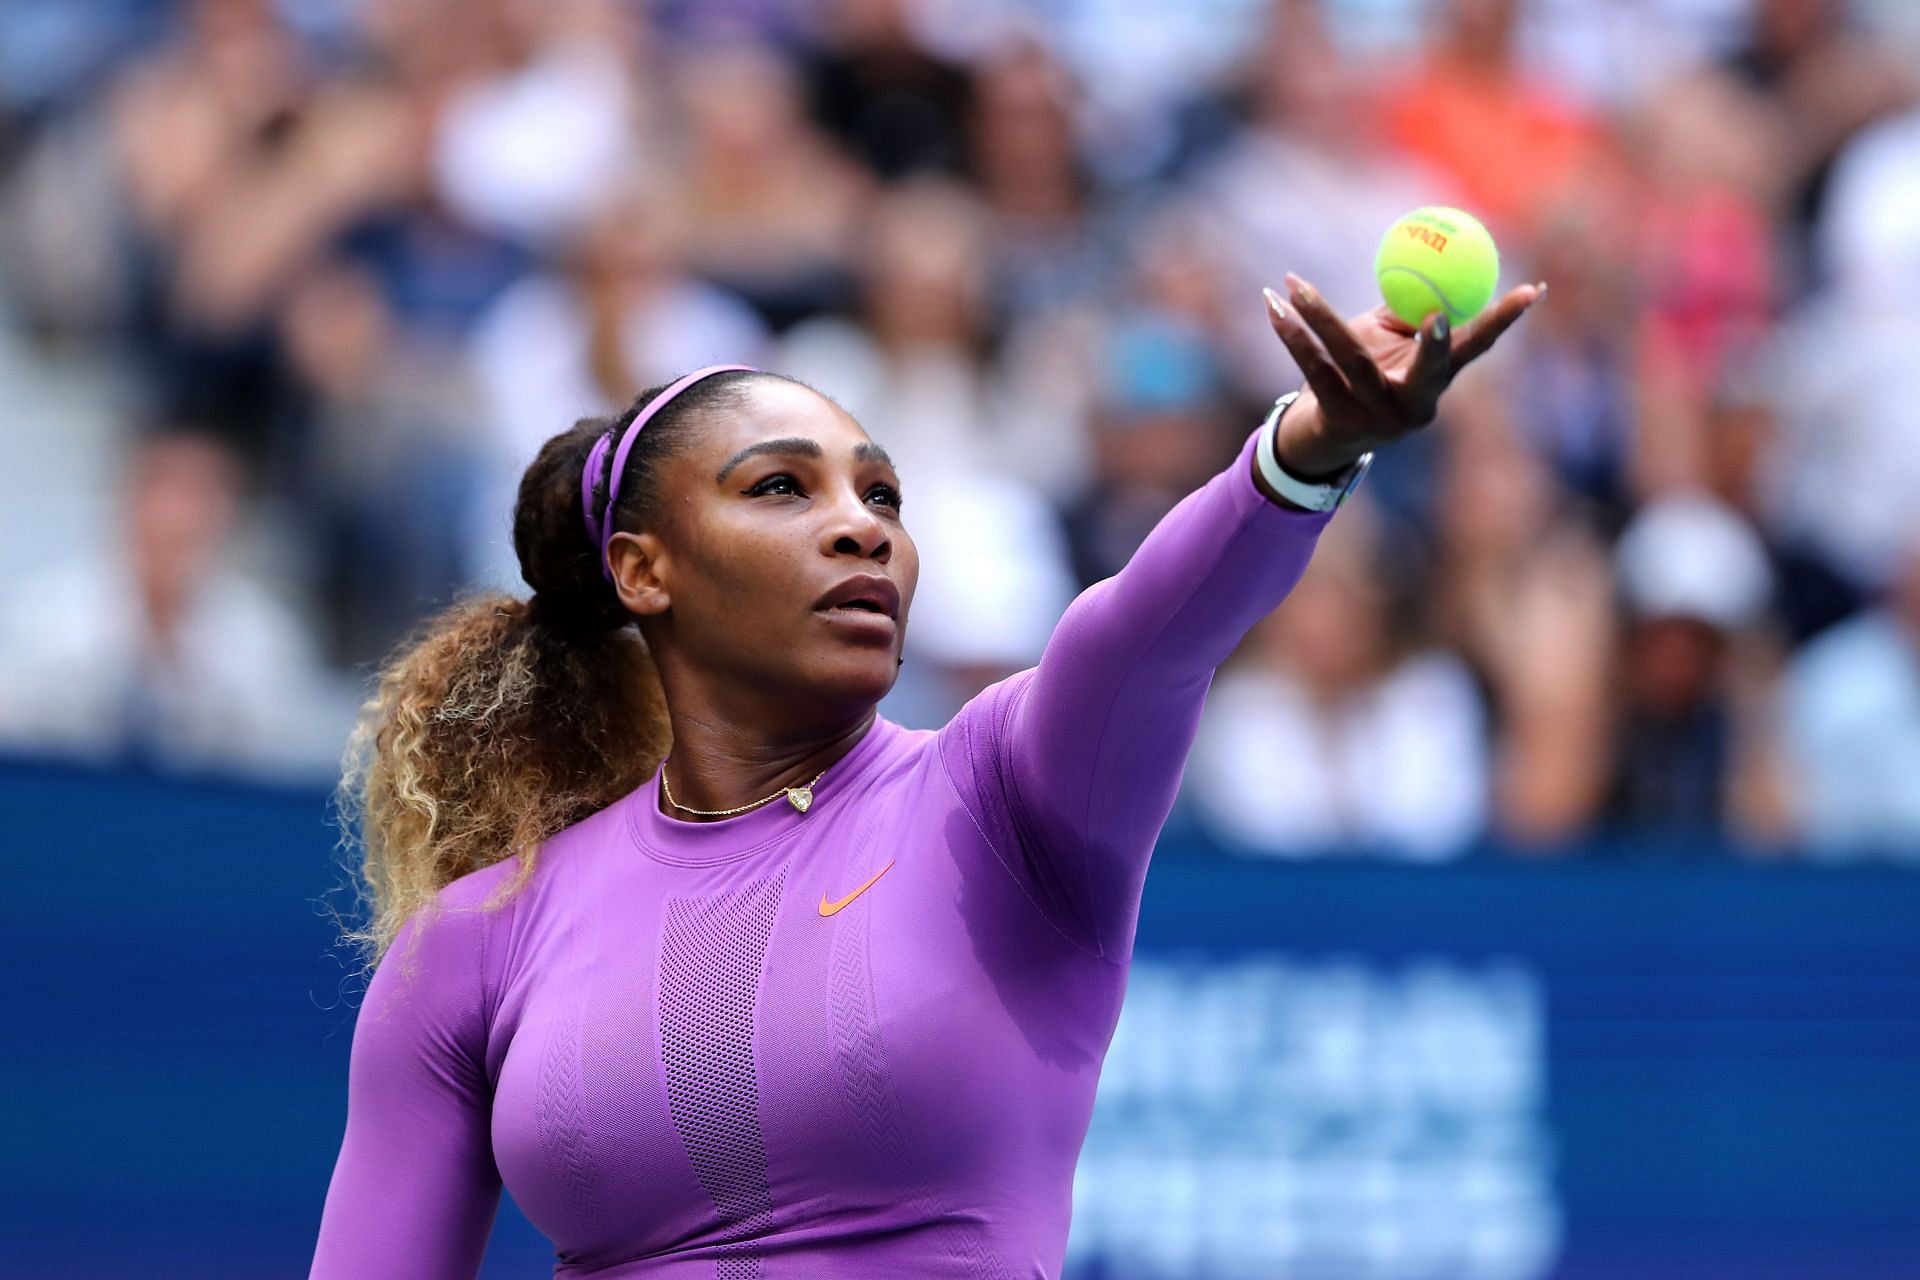 Serena Williams at the 2019 US Open.